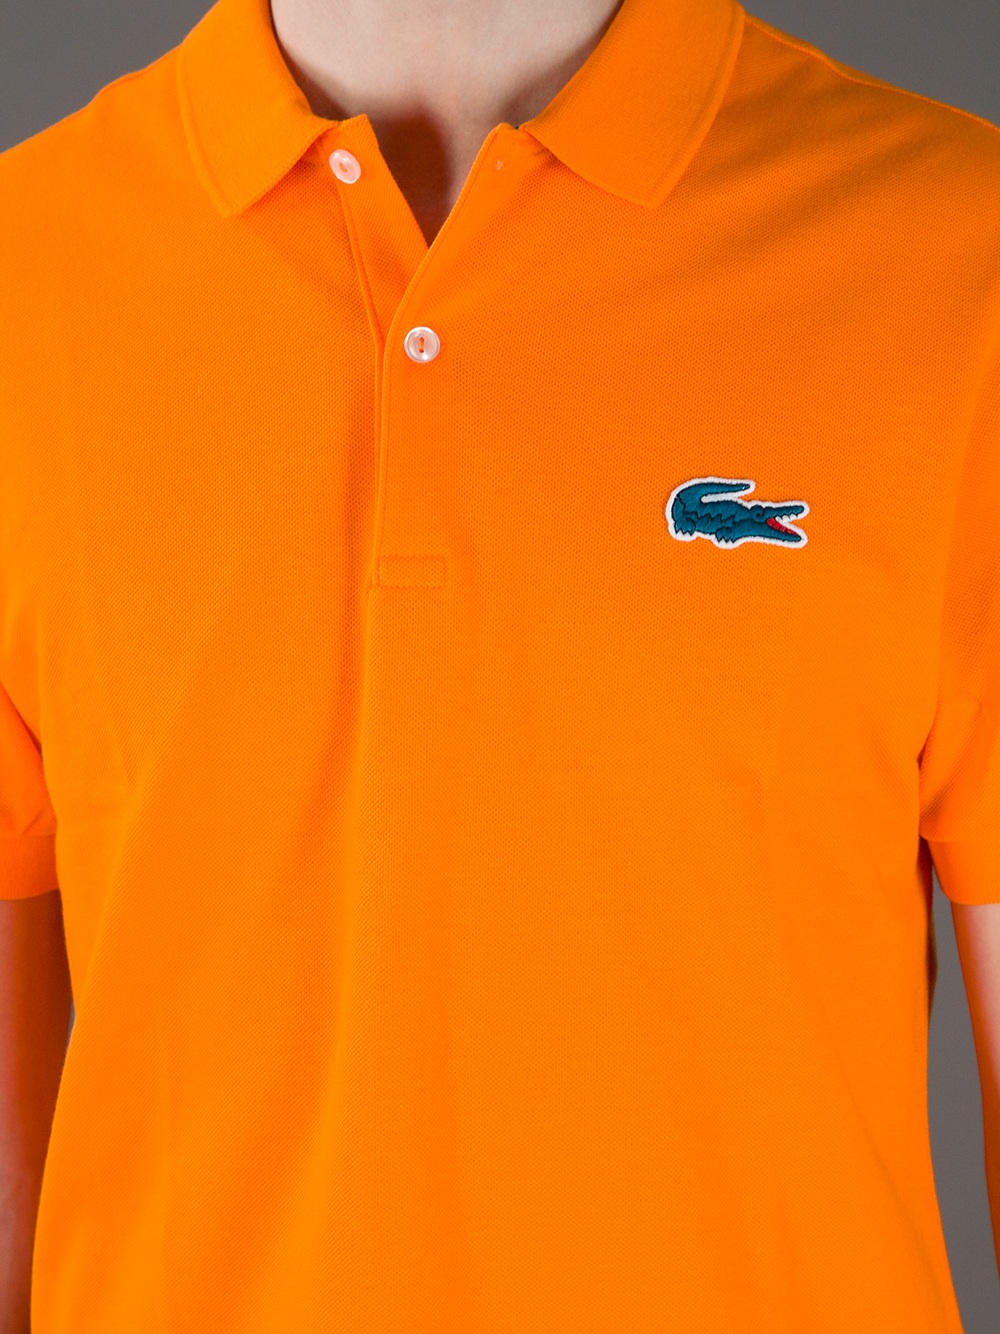 Lacoste L!ive Classic Polo Shirt in Orange for Men